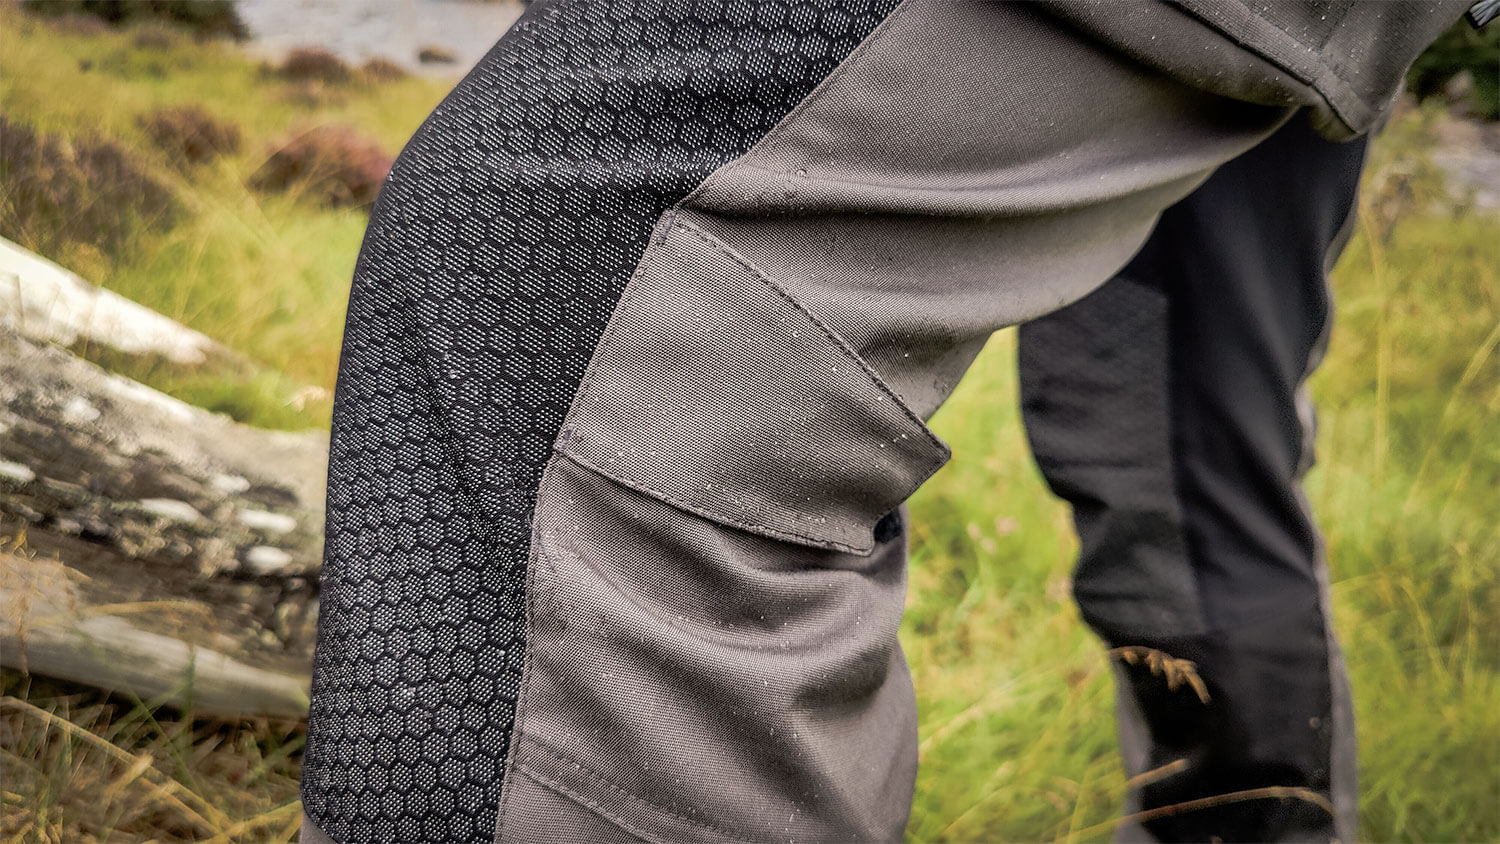 The ThruDark Charge outdoor trousers